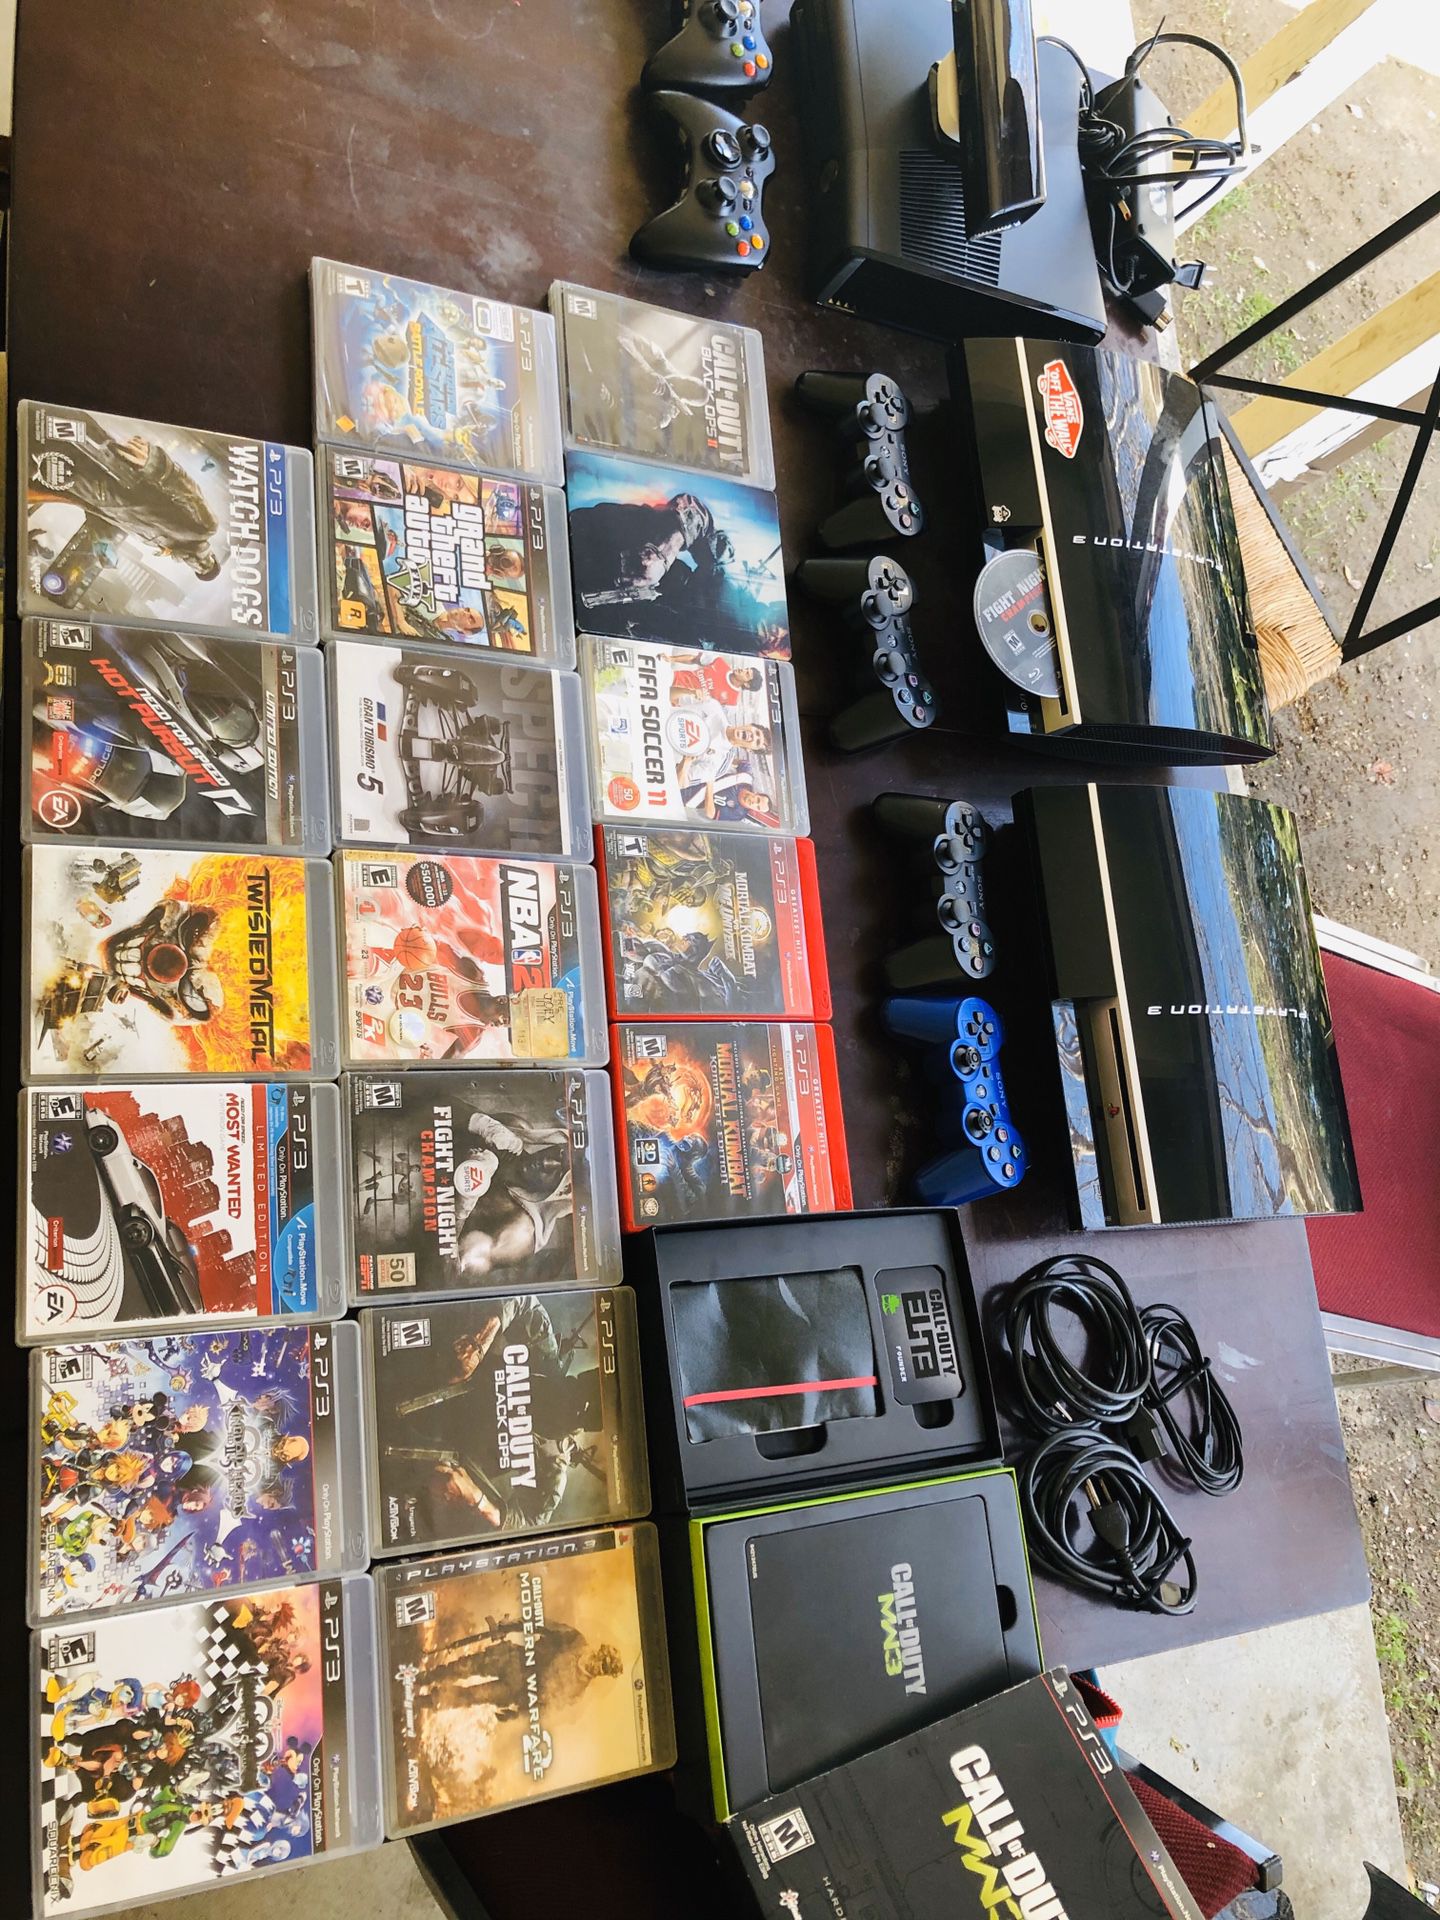 Sony Playstation 3 PS3 with games